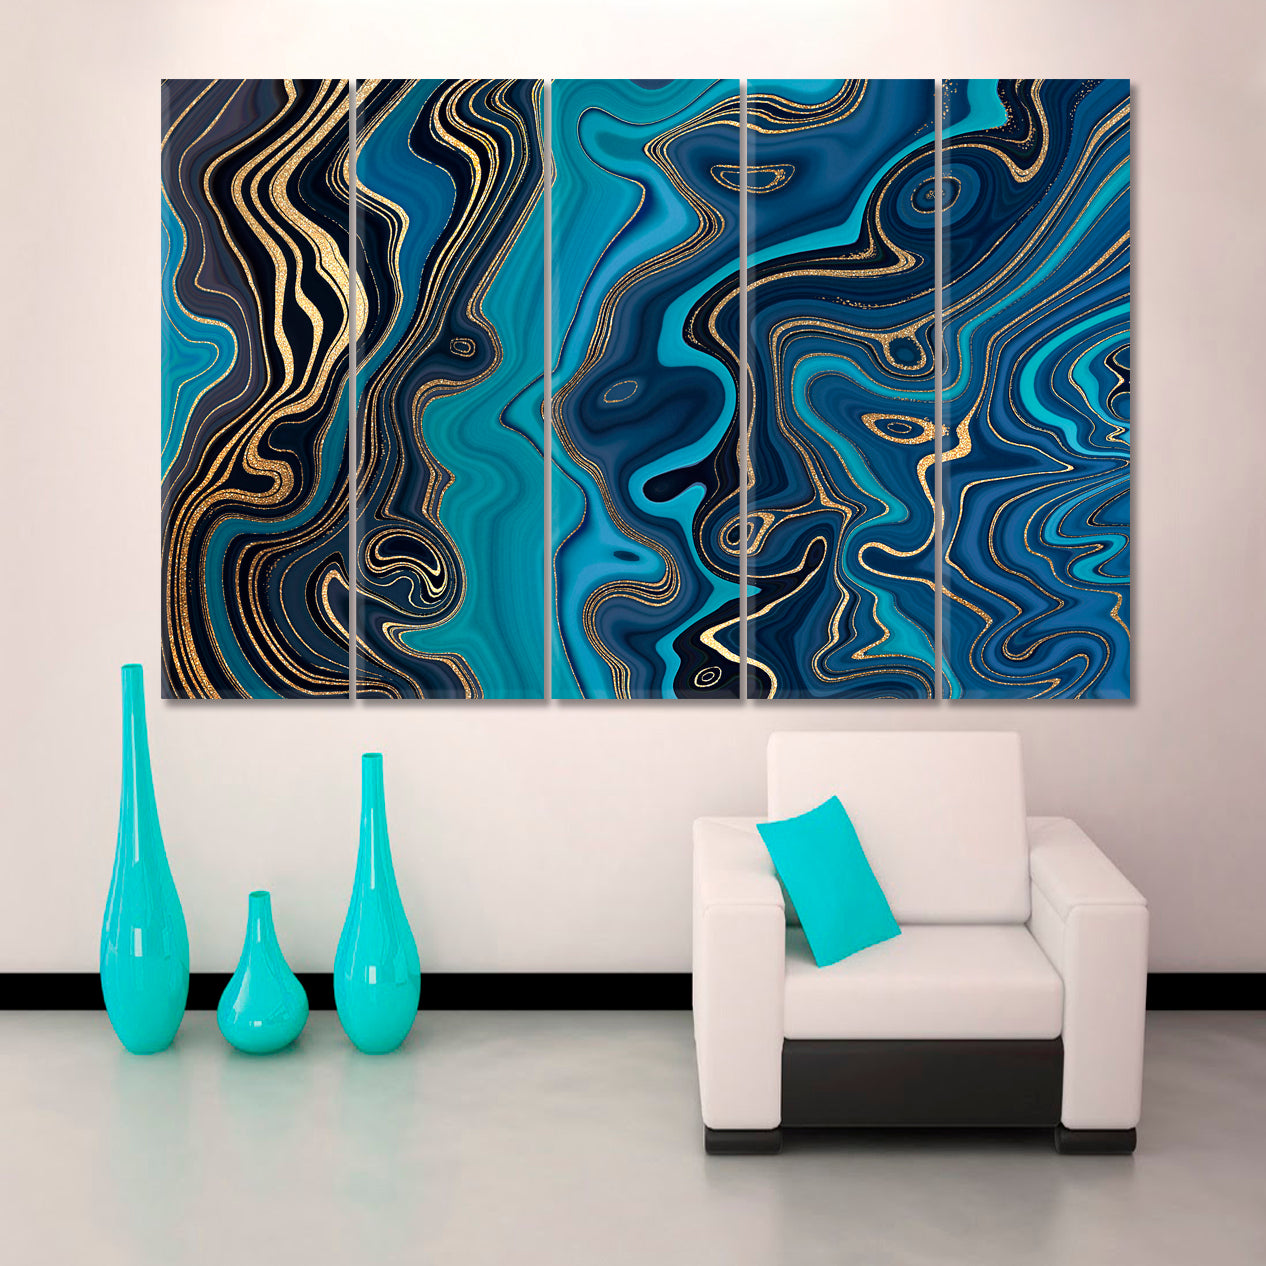 MARBLE EFFECT series Turquoise Navy Blue & Gold Abstract Swirl Artistic Design Giclée Print Fluid Art, Oriental Marbling Canvas Print Artesty   